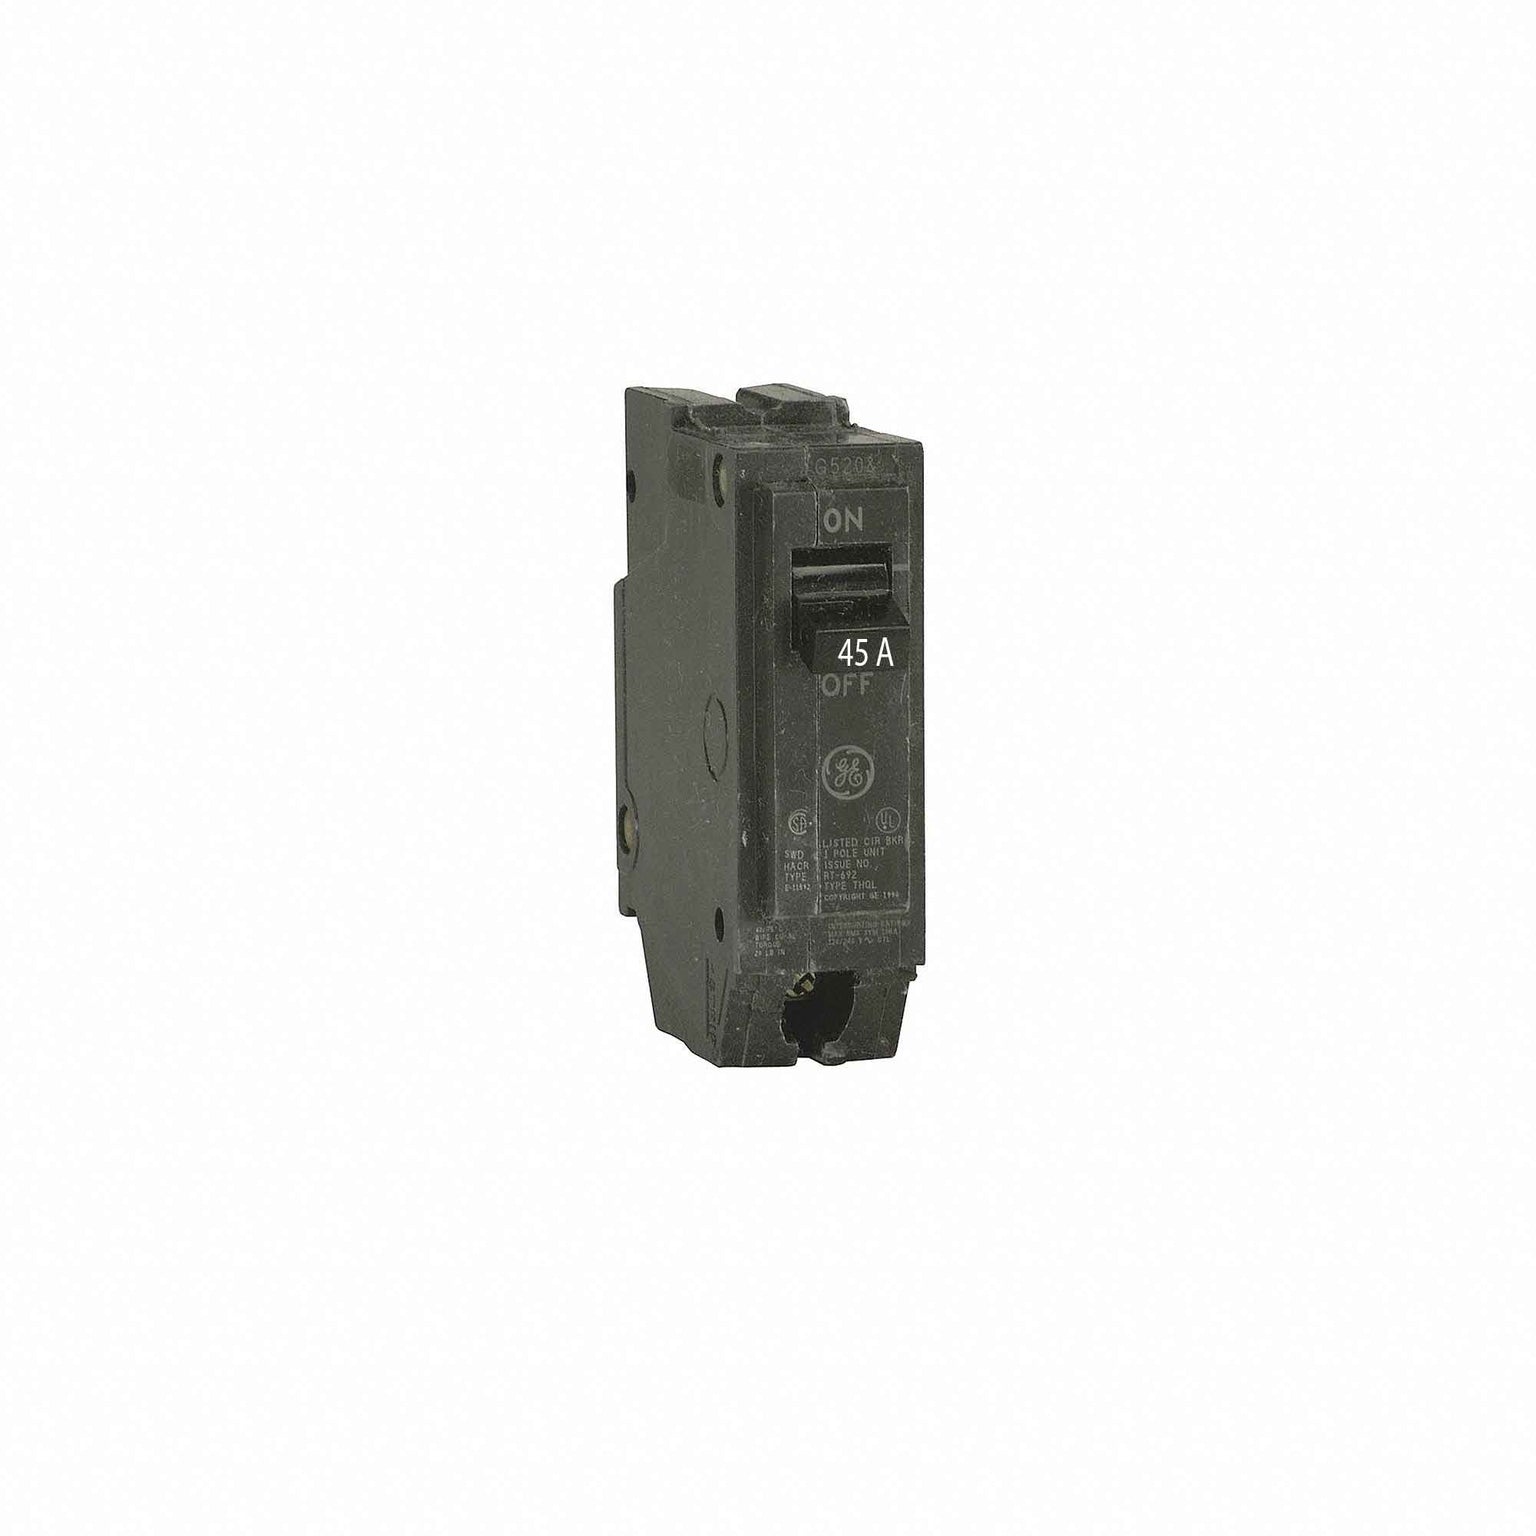 THQC1145WL - General Electrics - Molded Case Circuit Breakers
